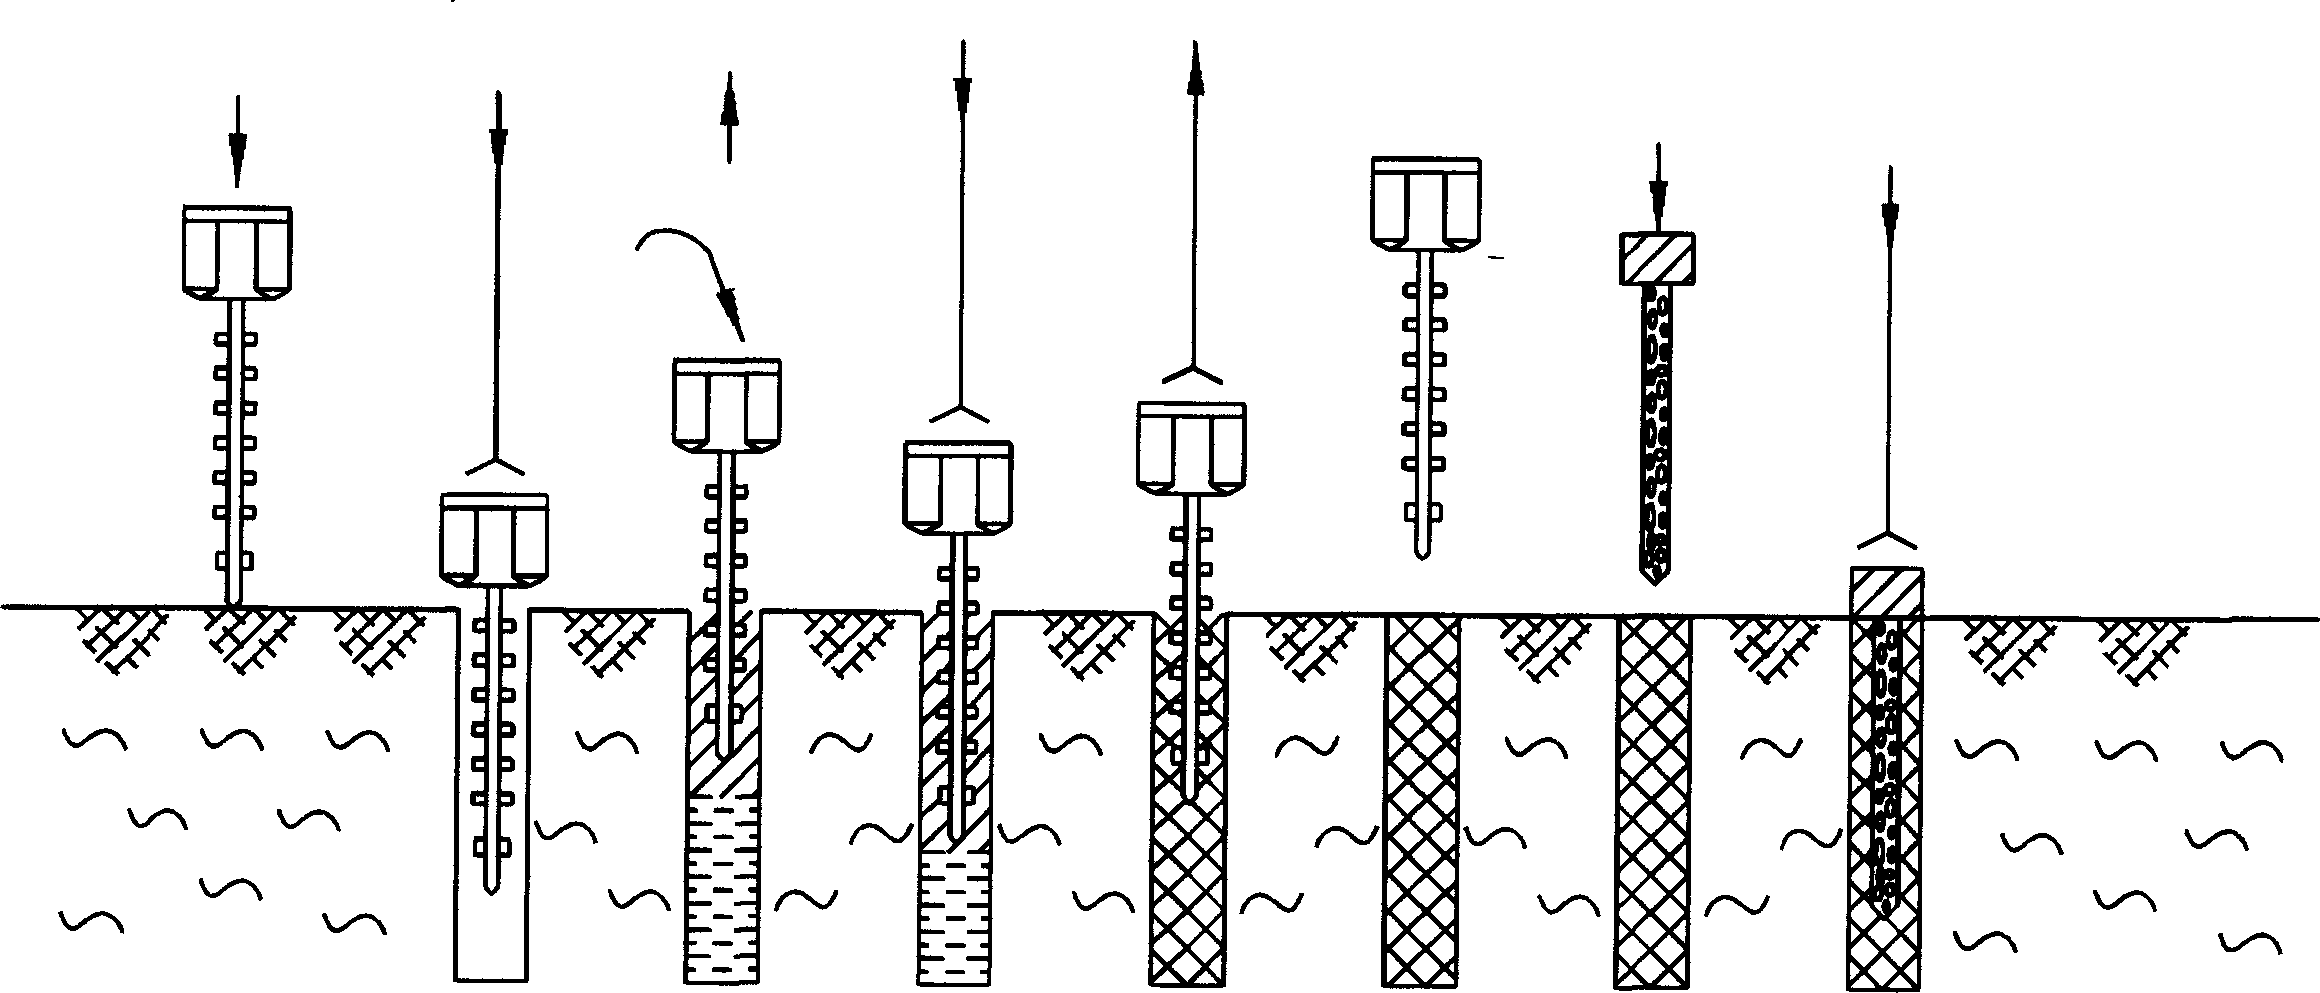 Original soil strengthen pile sinking method and its construction apparatus